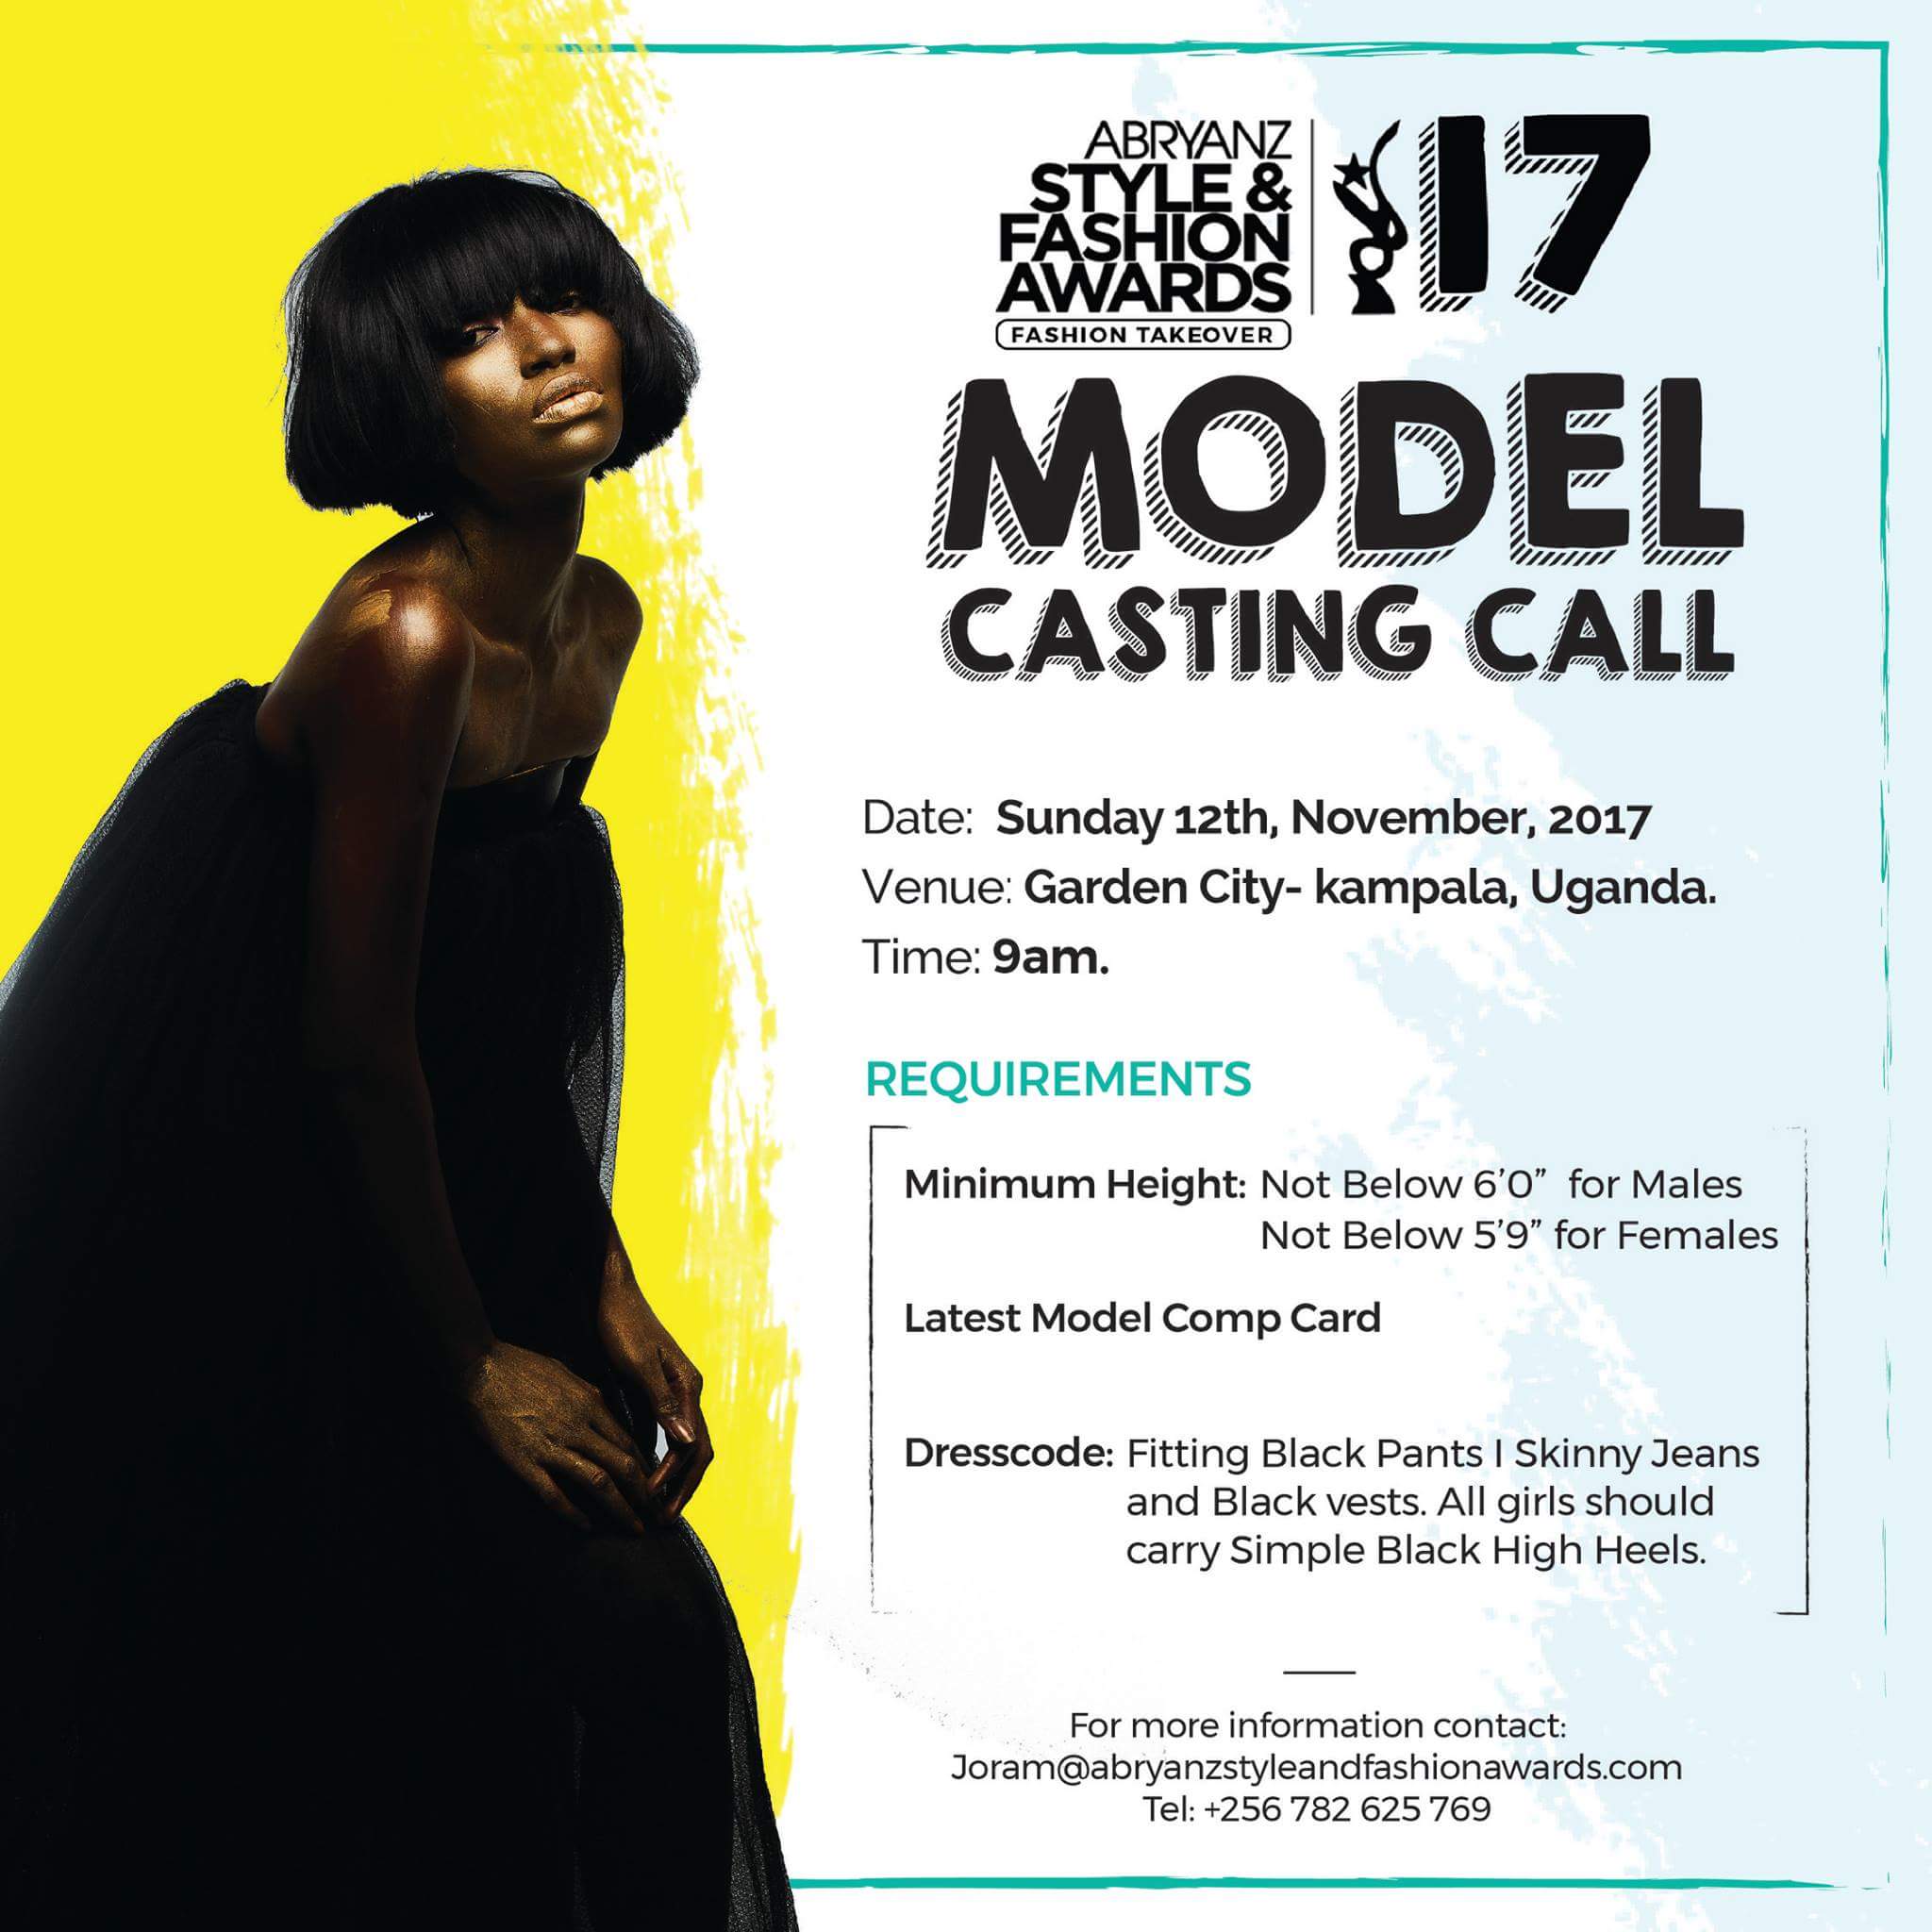 Do You Want To Be A Model on ASFA2017?